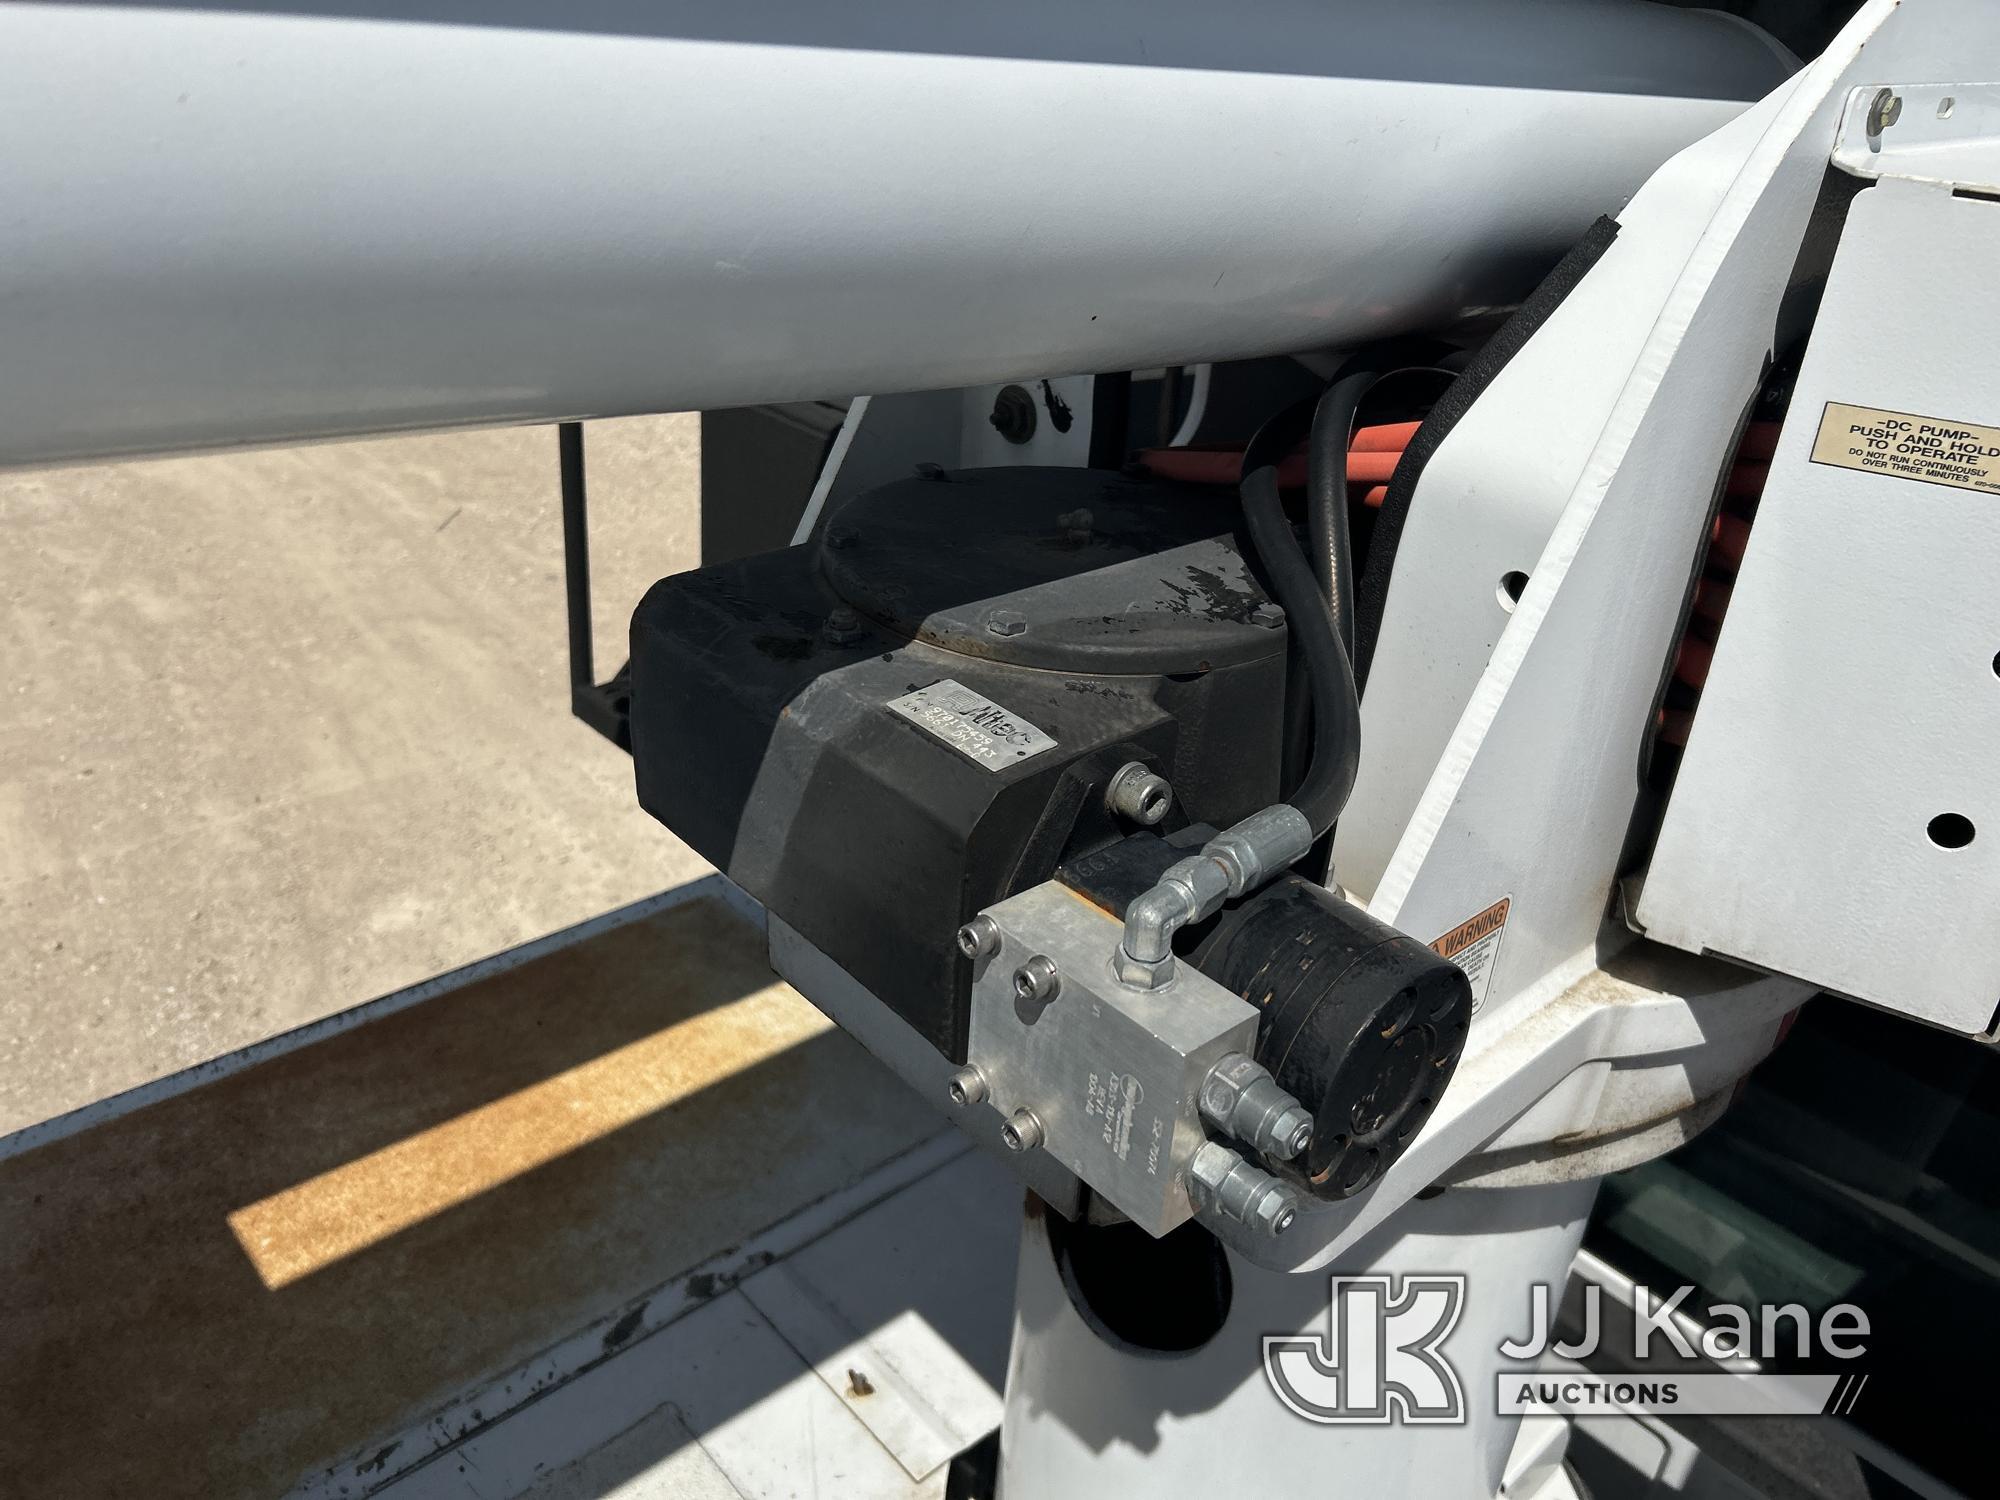 (Waxahachie, TX) Altec LR756, Over-Center Bucket Truck mounted behind cab on 2013 Ford F750 Chipper